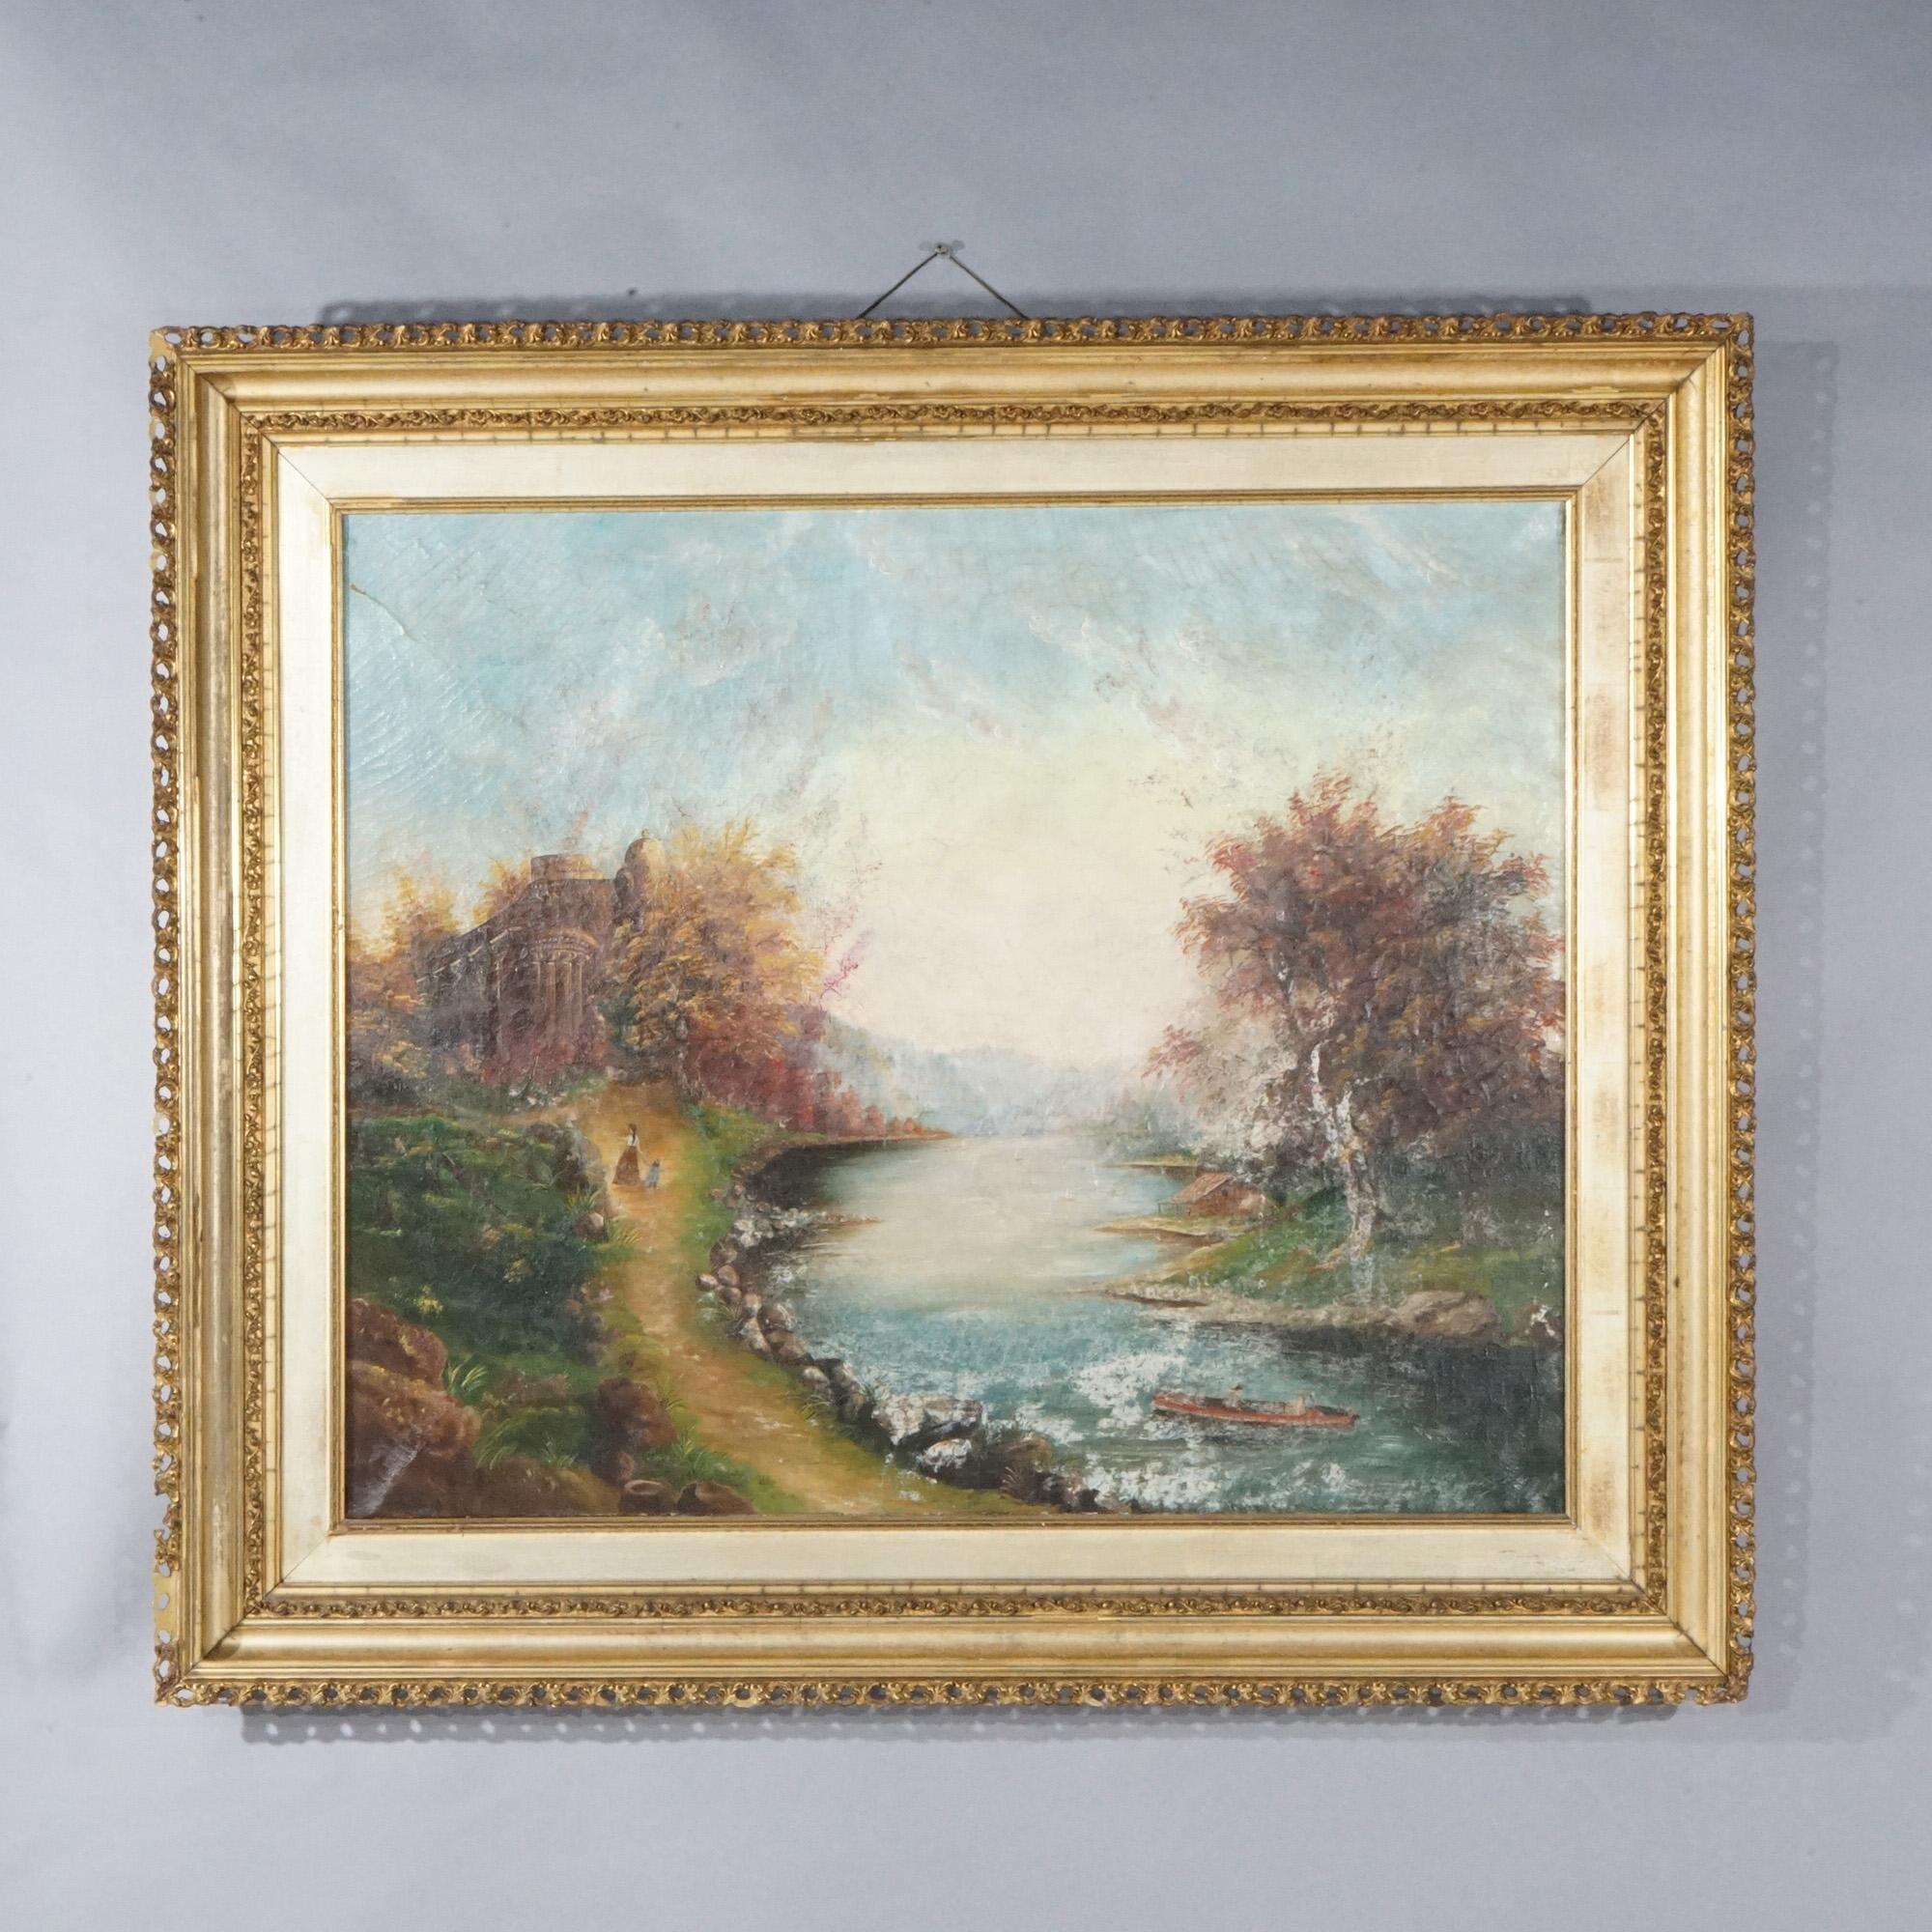 An antique Hudson River School style painting offers oil on canvas landscape river scene with figures, a canoe, and Roman-Greco style architectural ruins, seated in giltwood frame, 19th century

Measures - 38.5